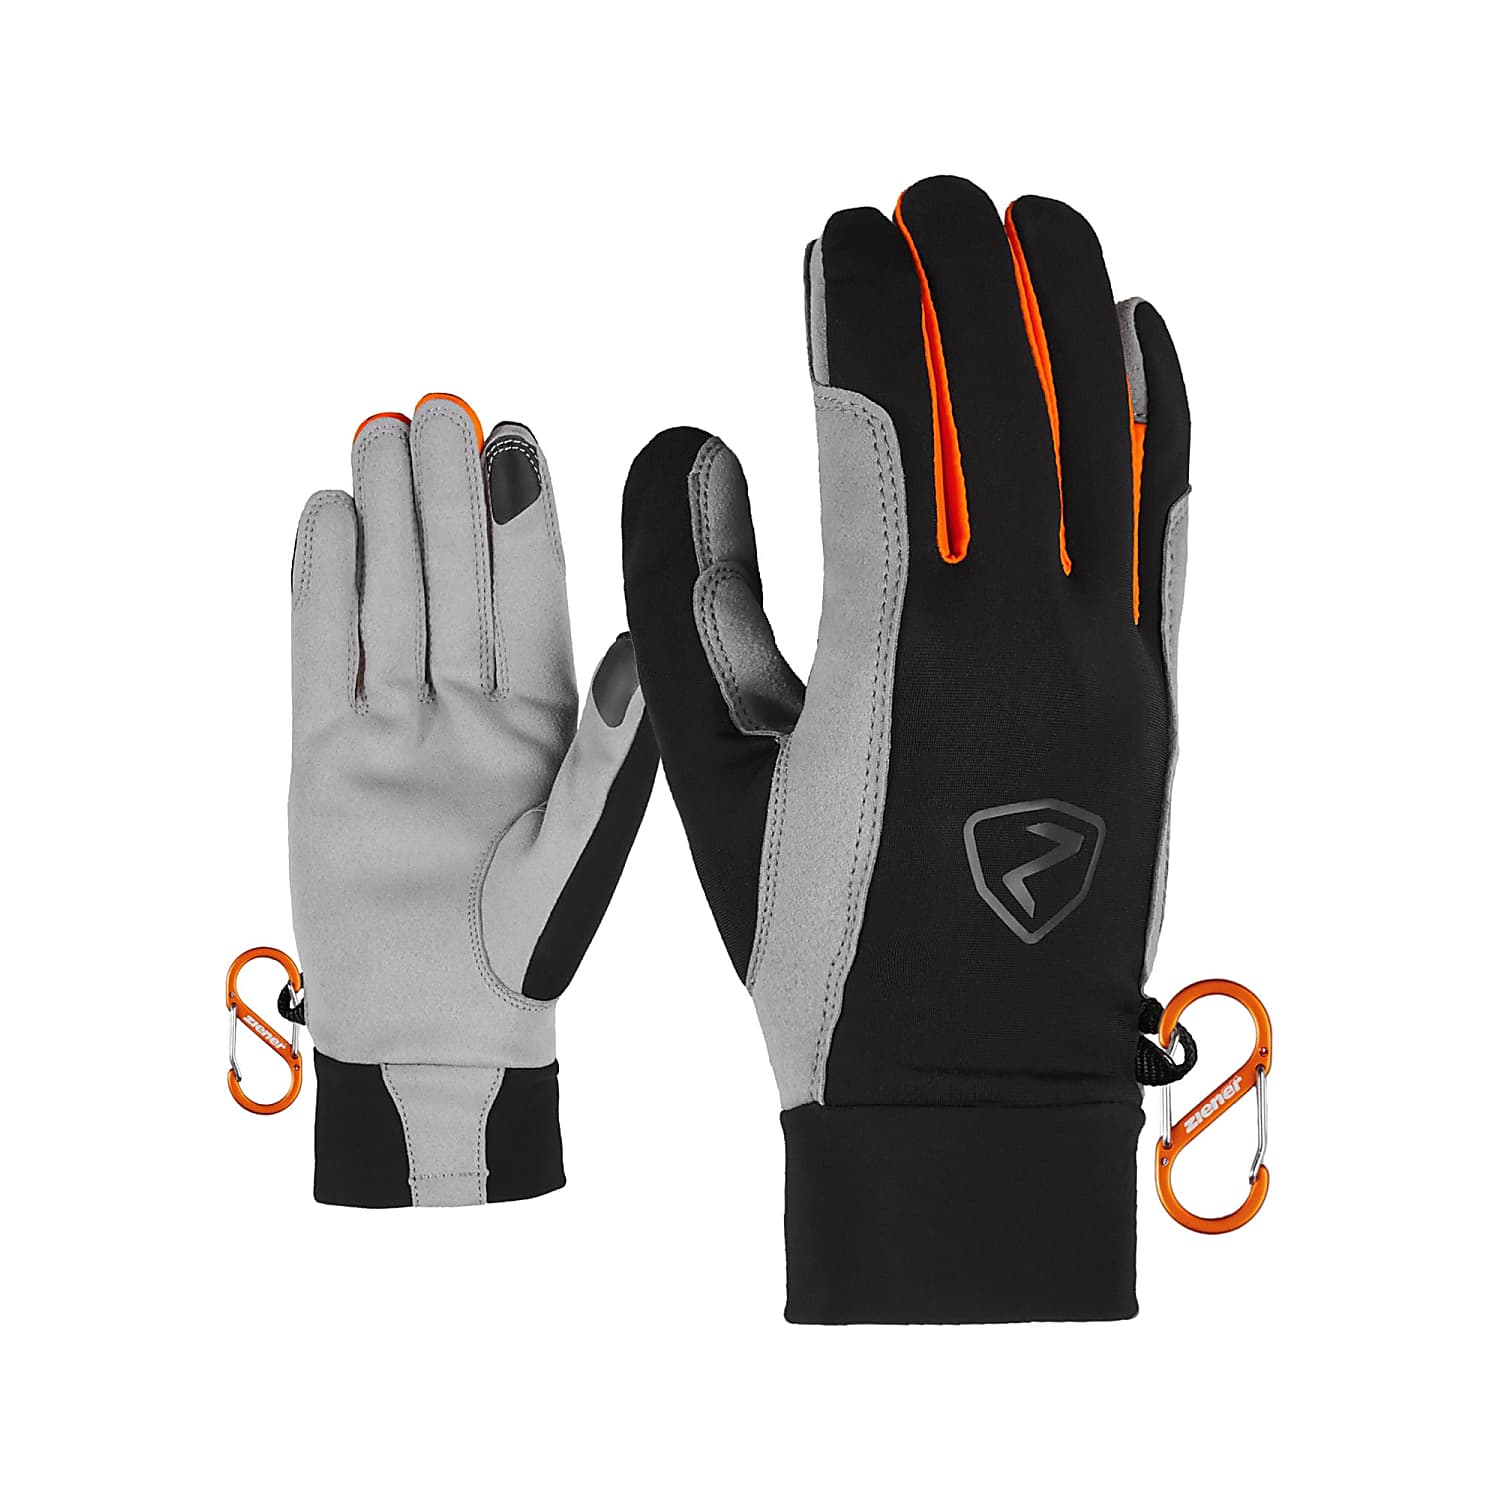 shipping GLOVE, Ziener - and Orange TOUCH cheap GUSTY New Fast - Black